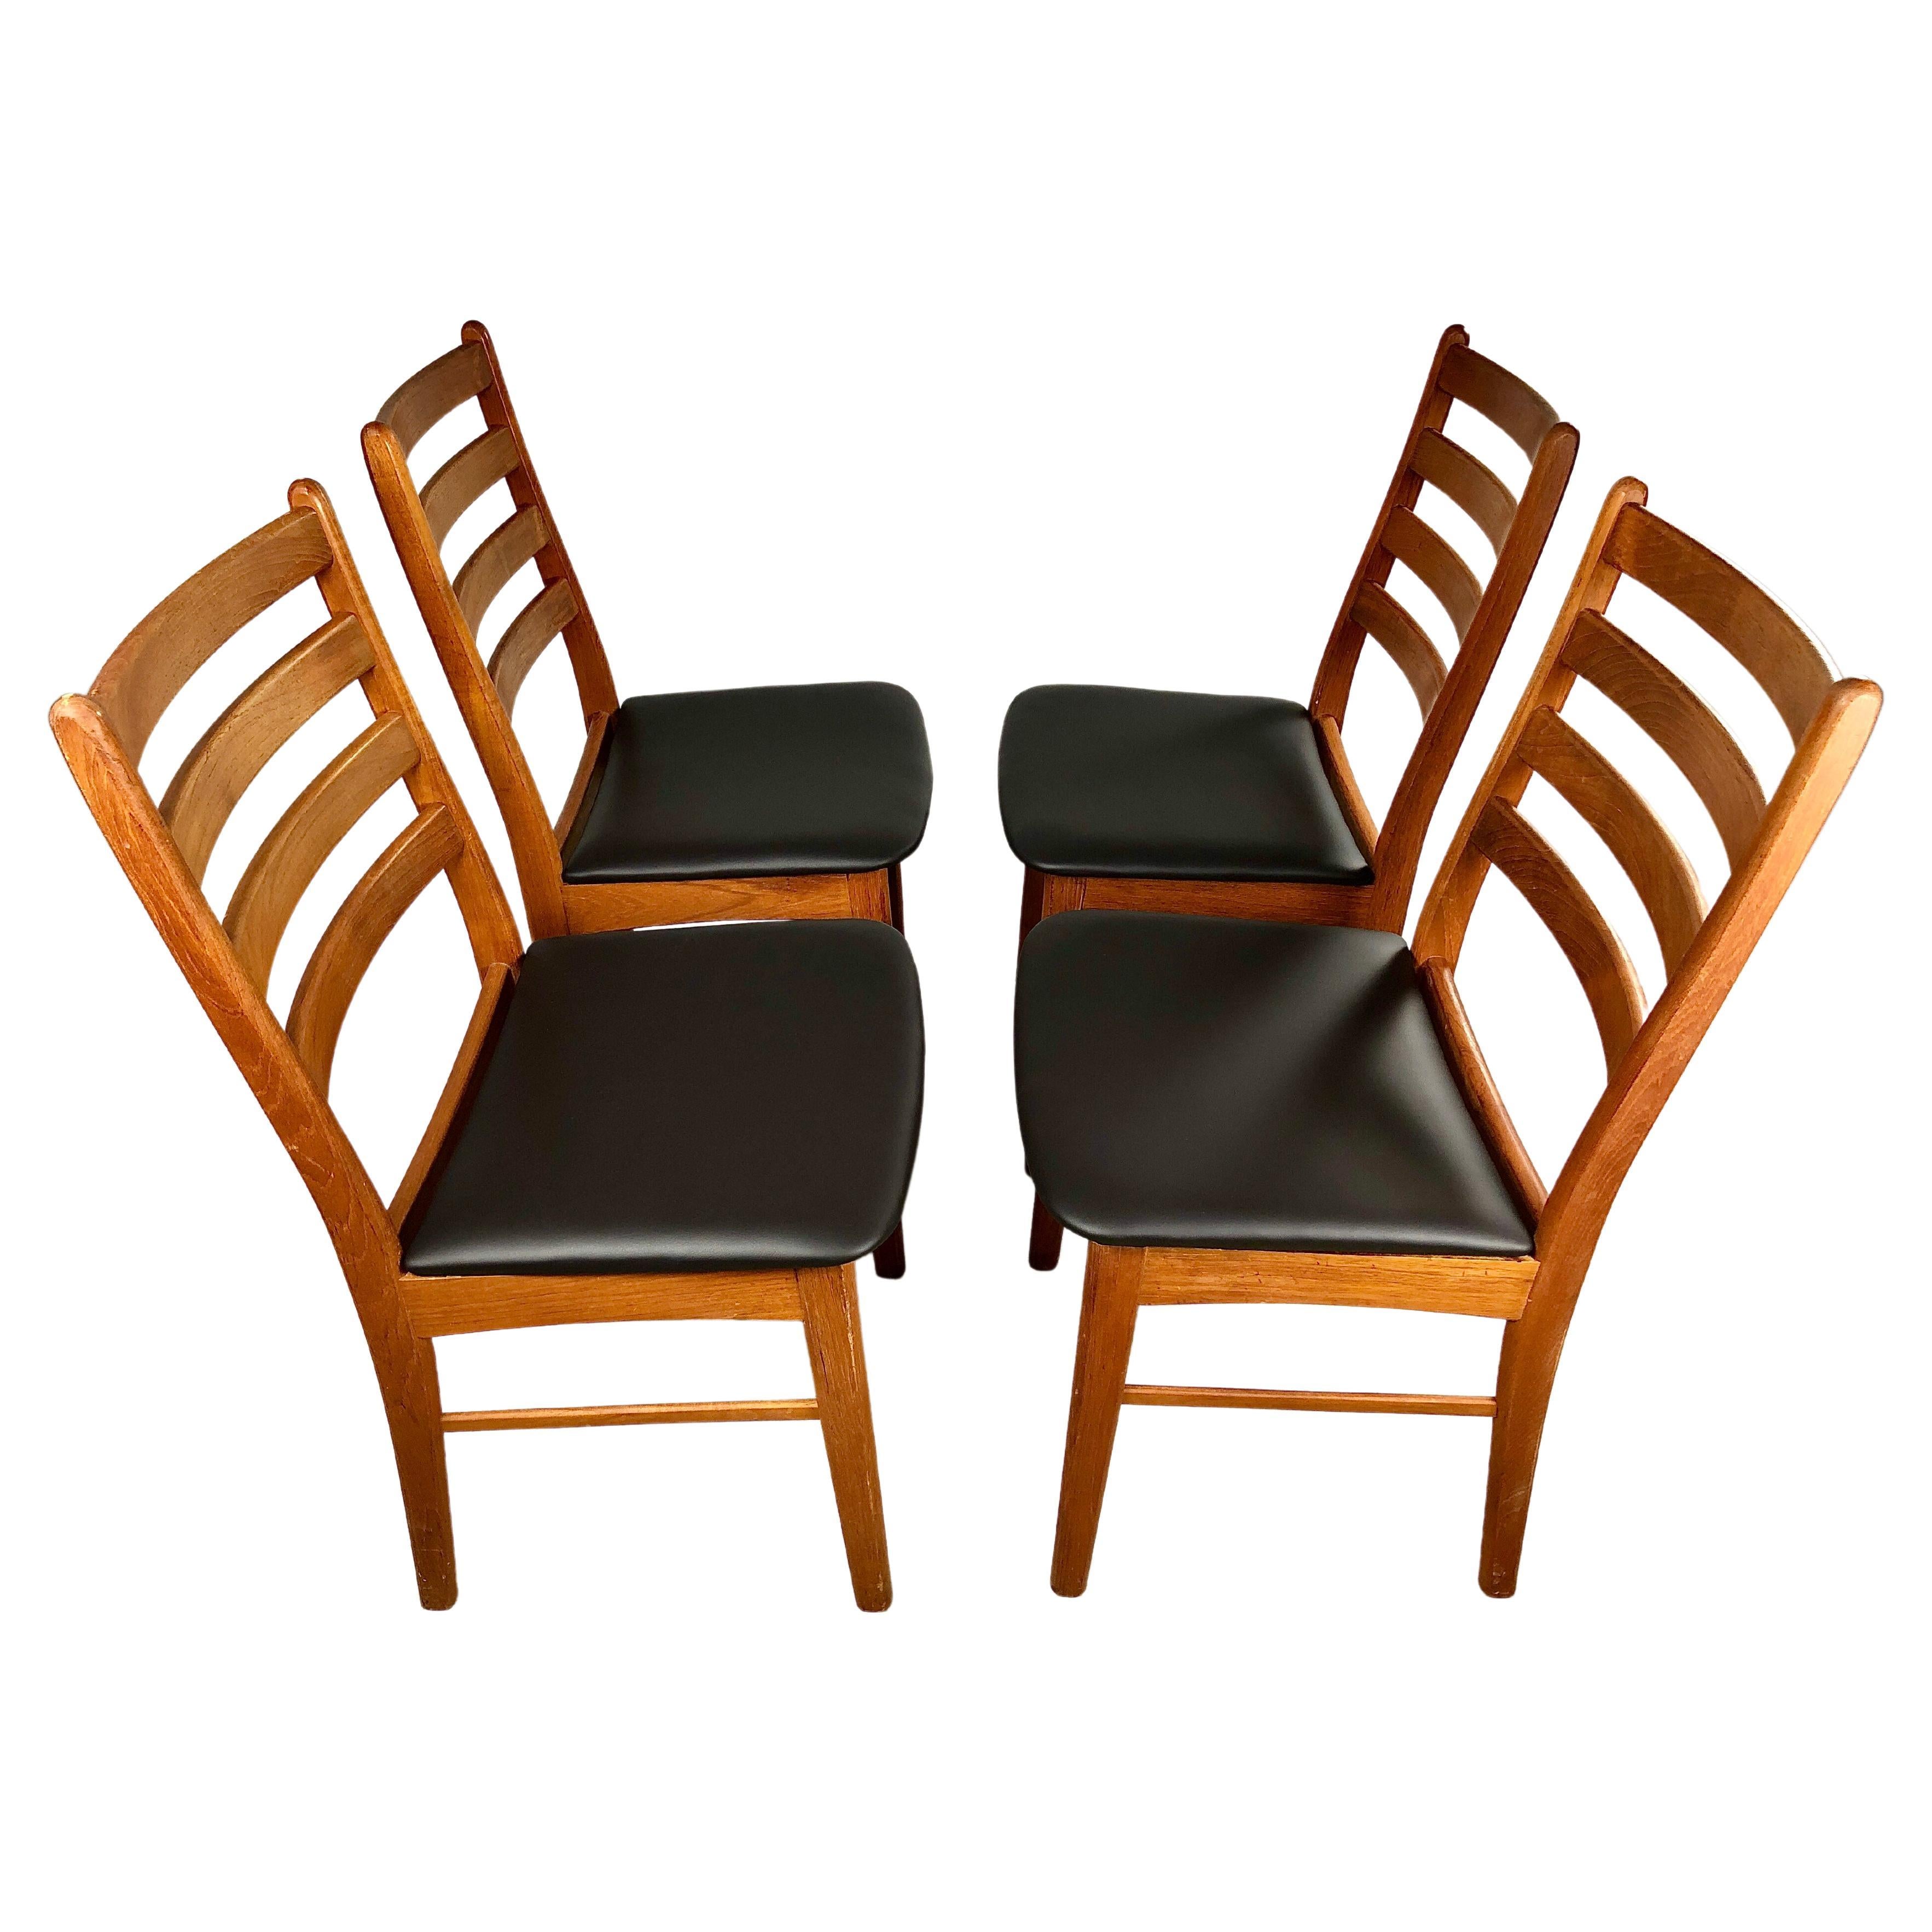 1970´s Four Danish Teak Dining Chairs with Leathered Seats by Korup Stolefabrik